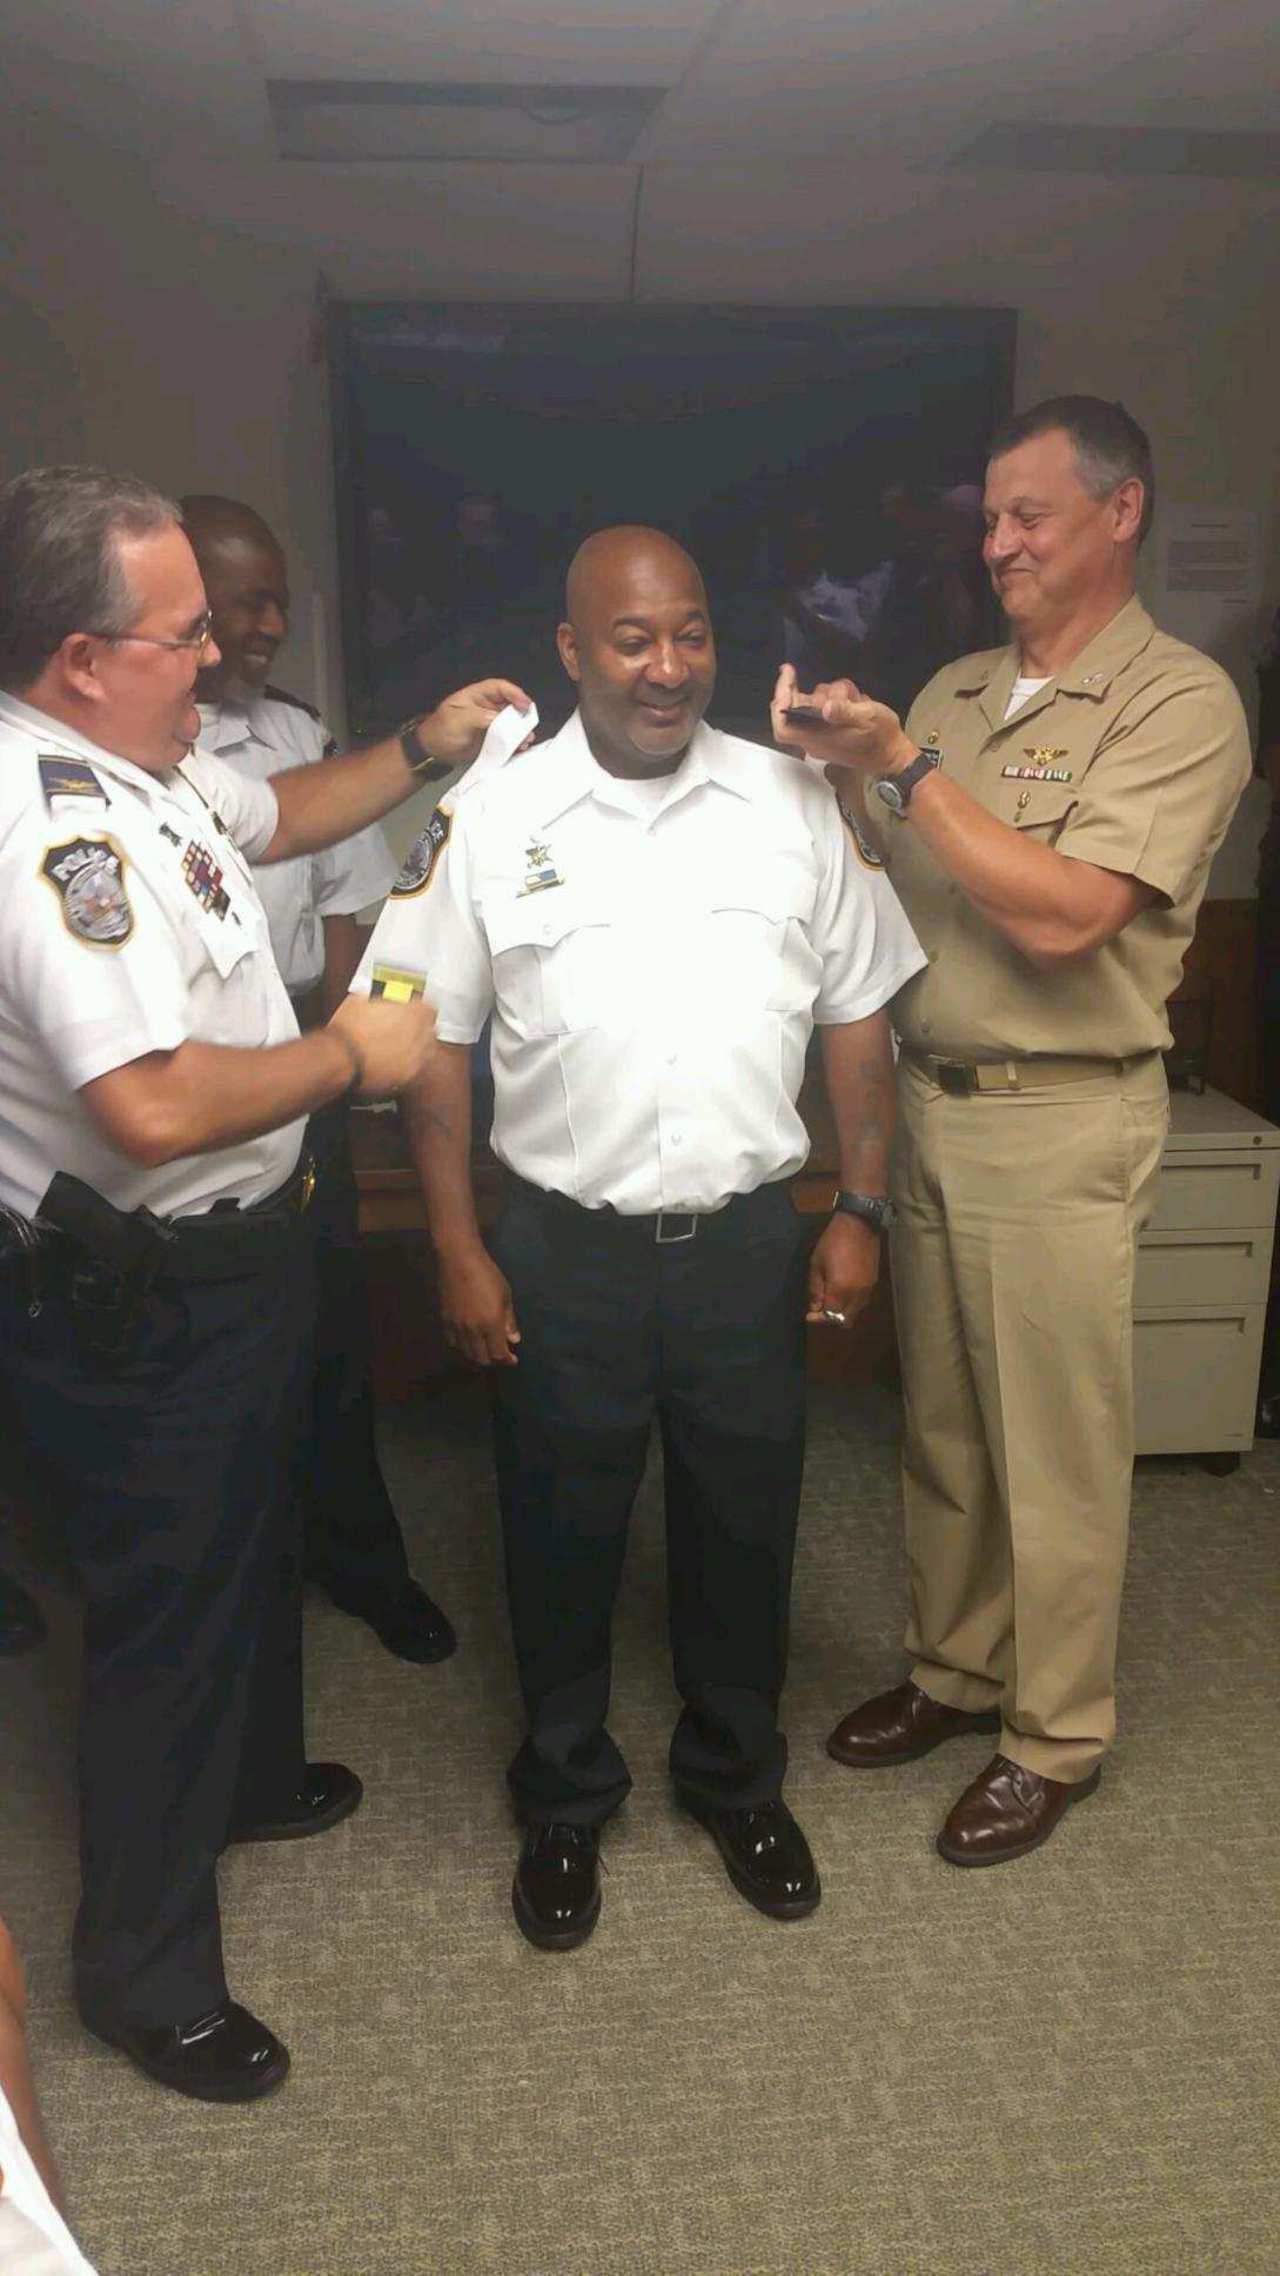 Sgt. Rucker Promotion to LT